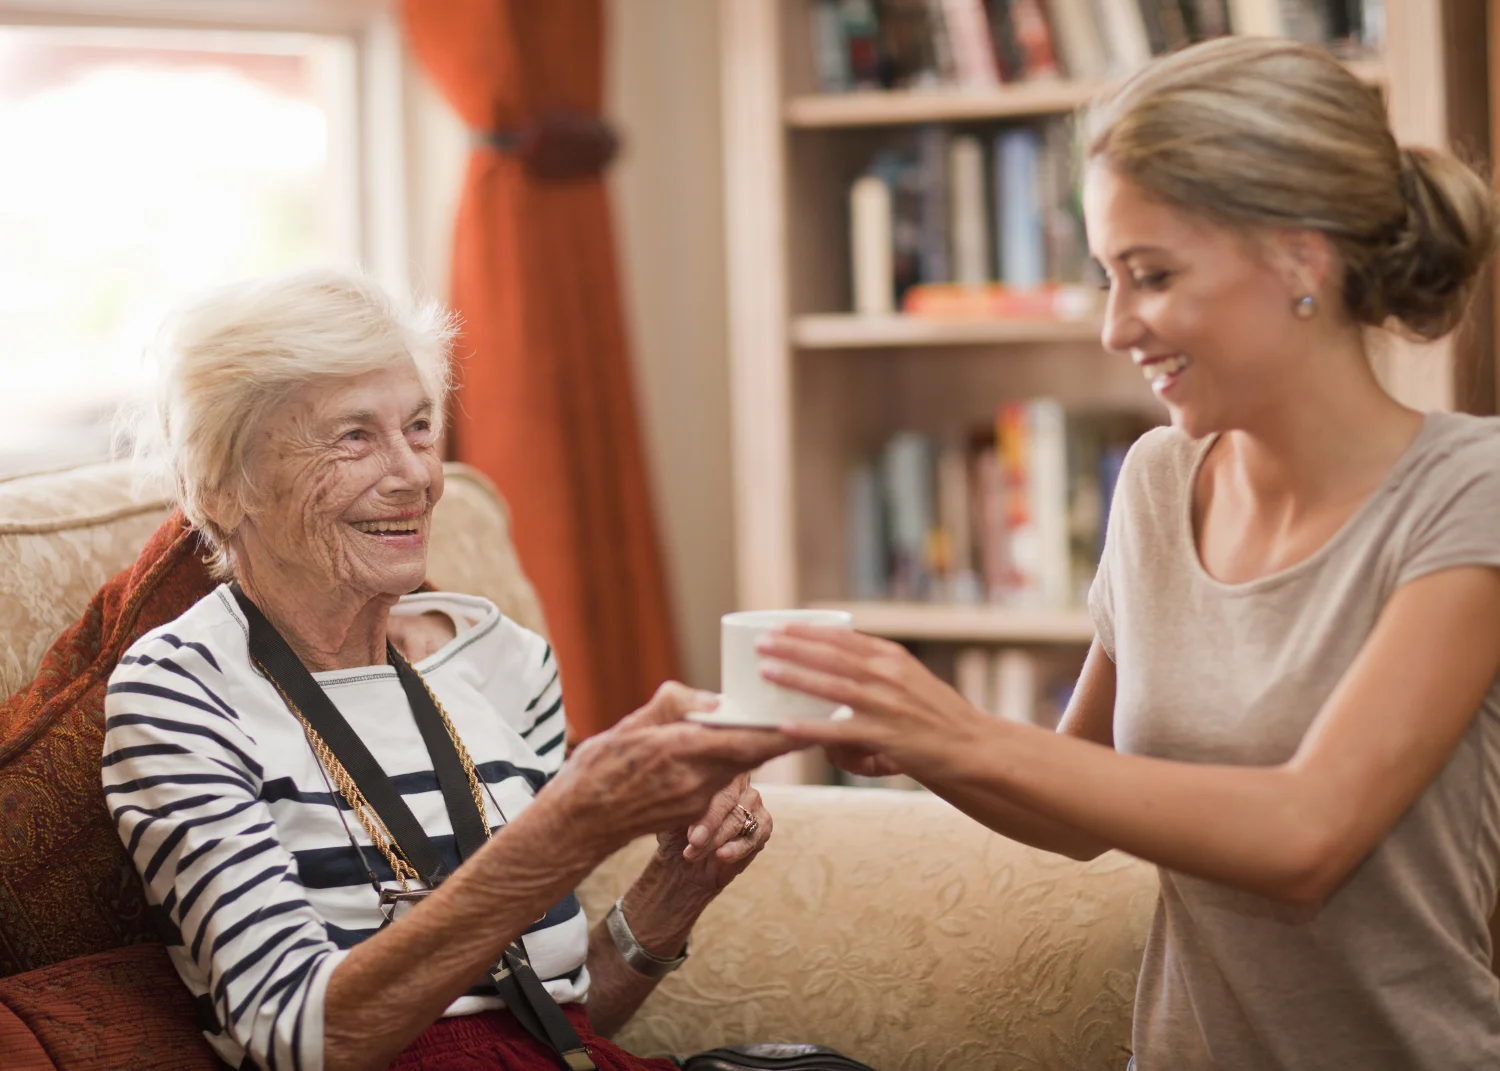 Care assistant handing coffee to smiling senior woman.